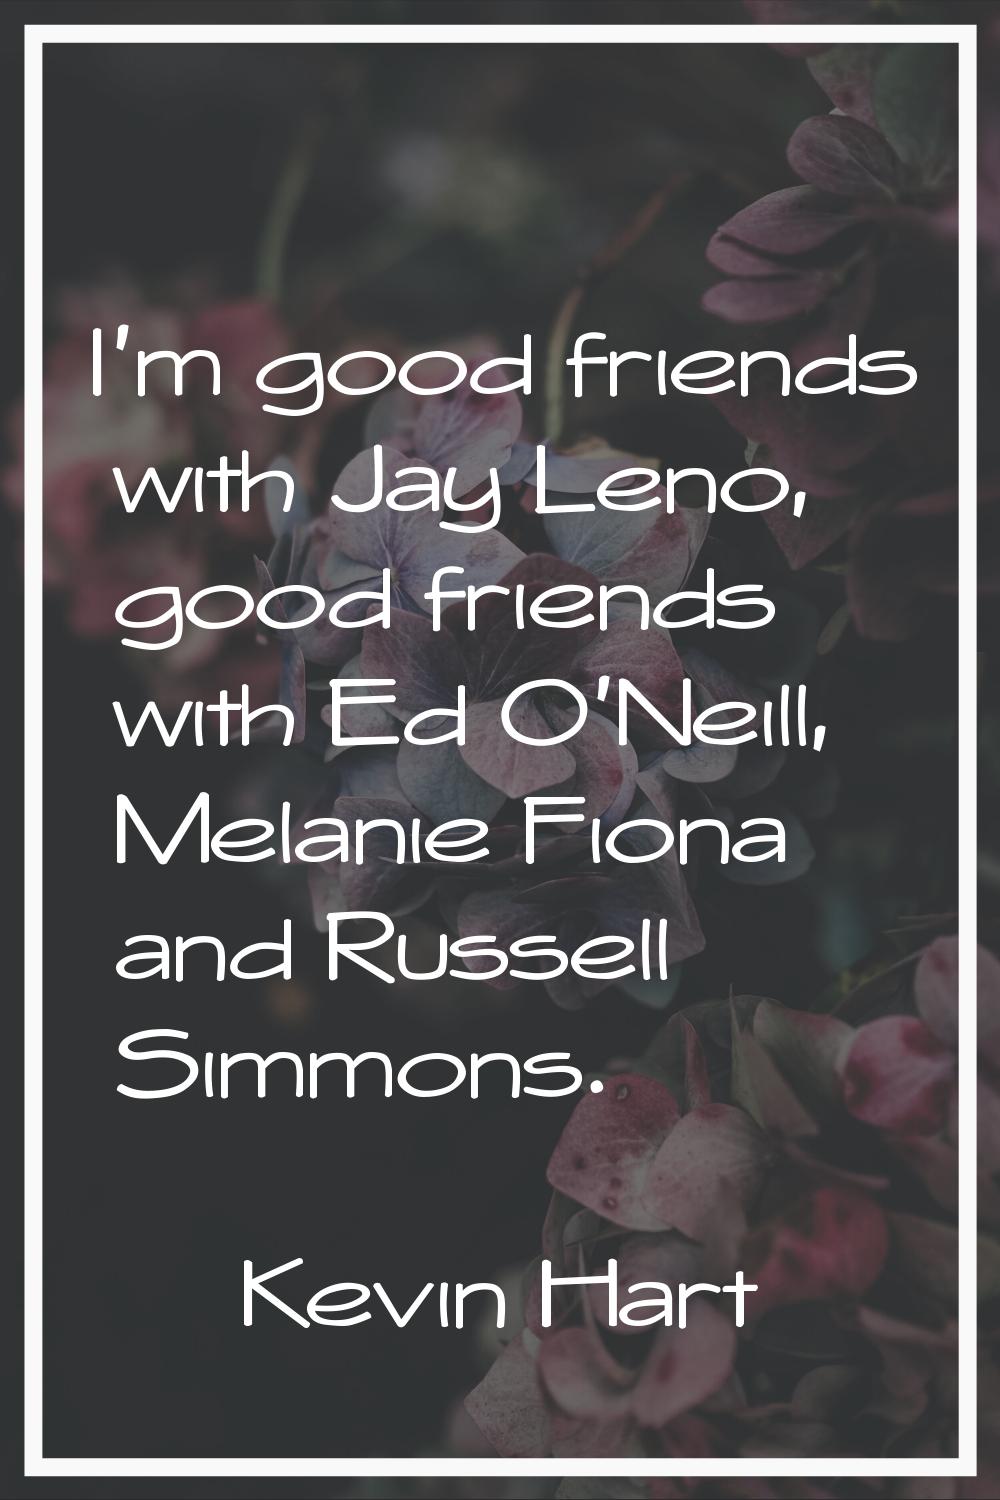 I'm good friends with Jay Leno, good friends with Ed O'Neill, Melanie Fiona and Russell Simmons.